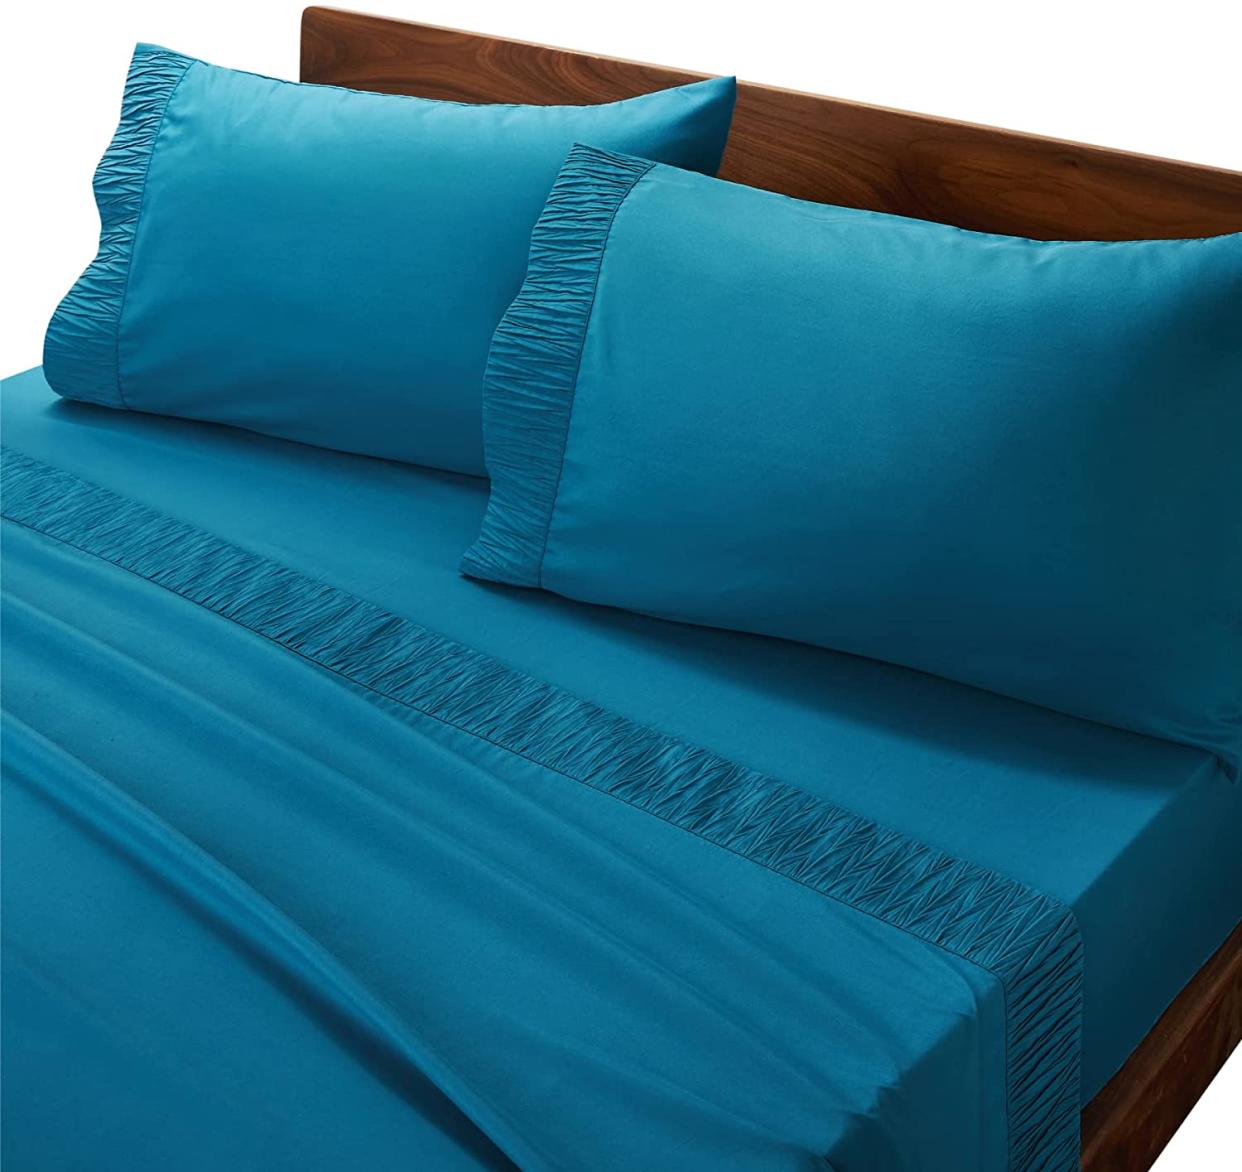 Bedsure Queen Bed Sheets Set in teal. (Photo: Amazon)